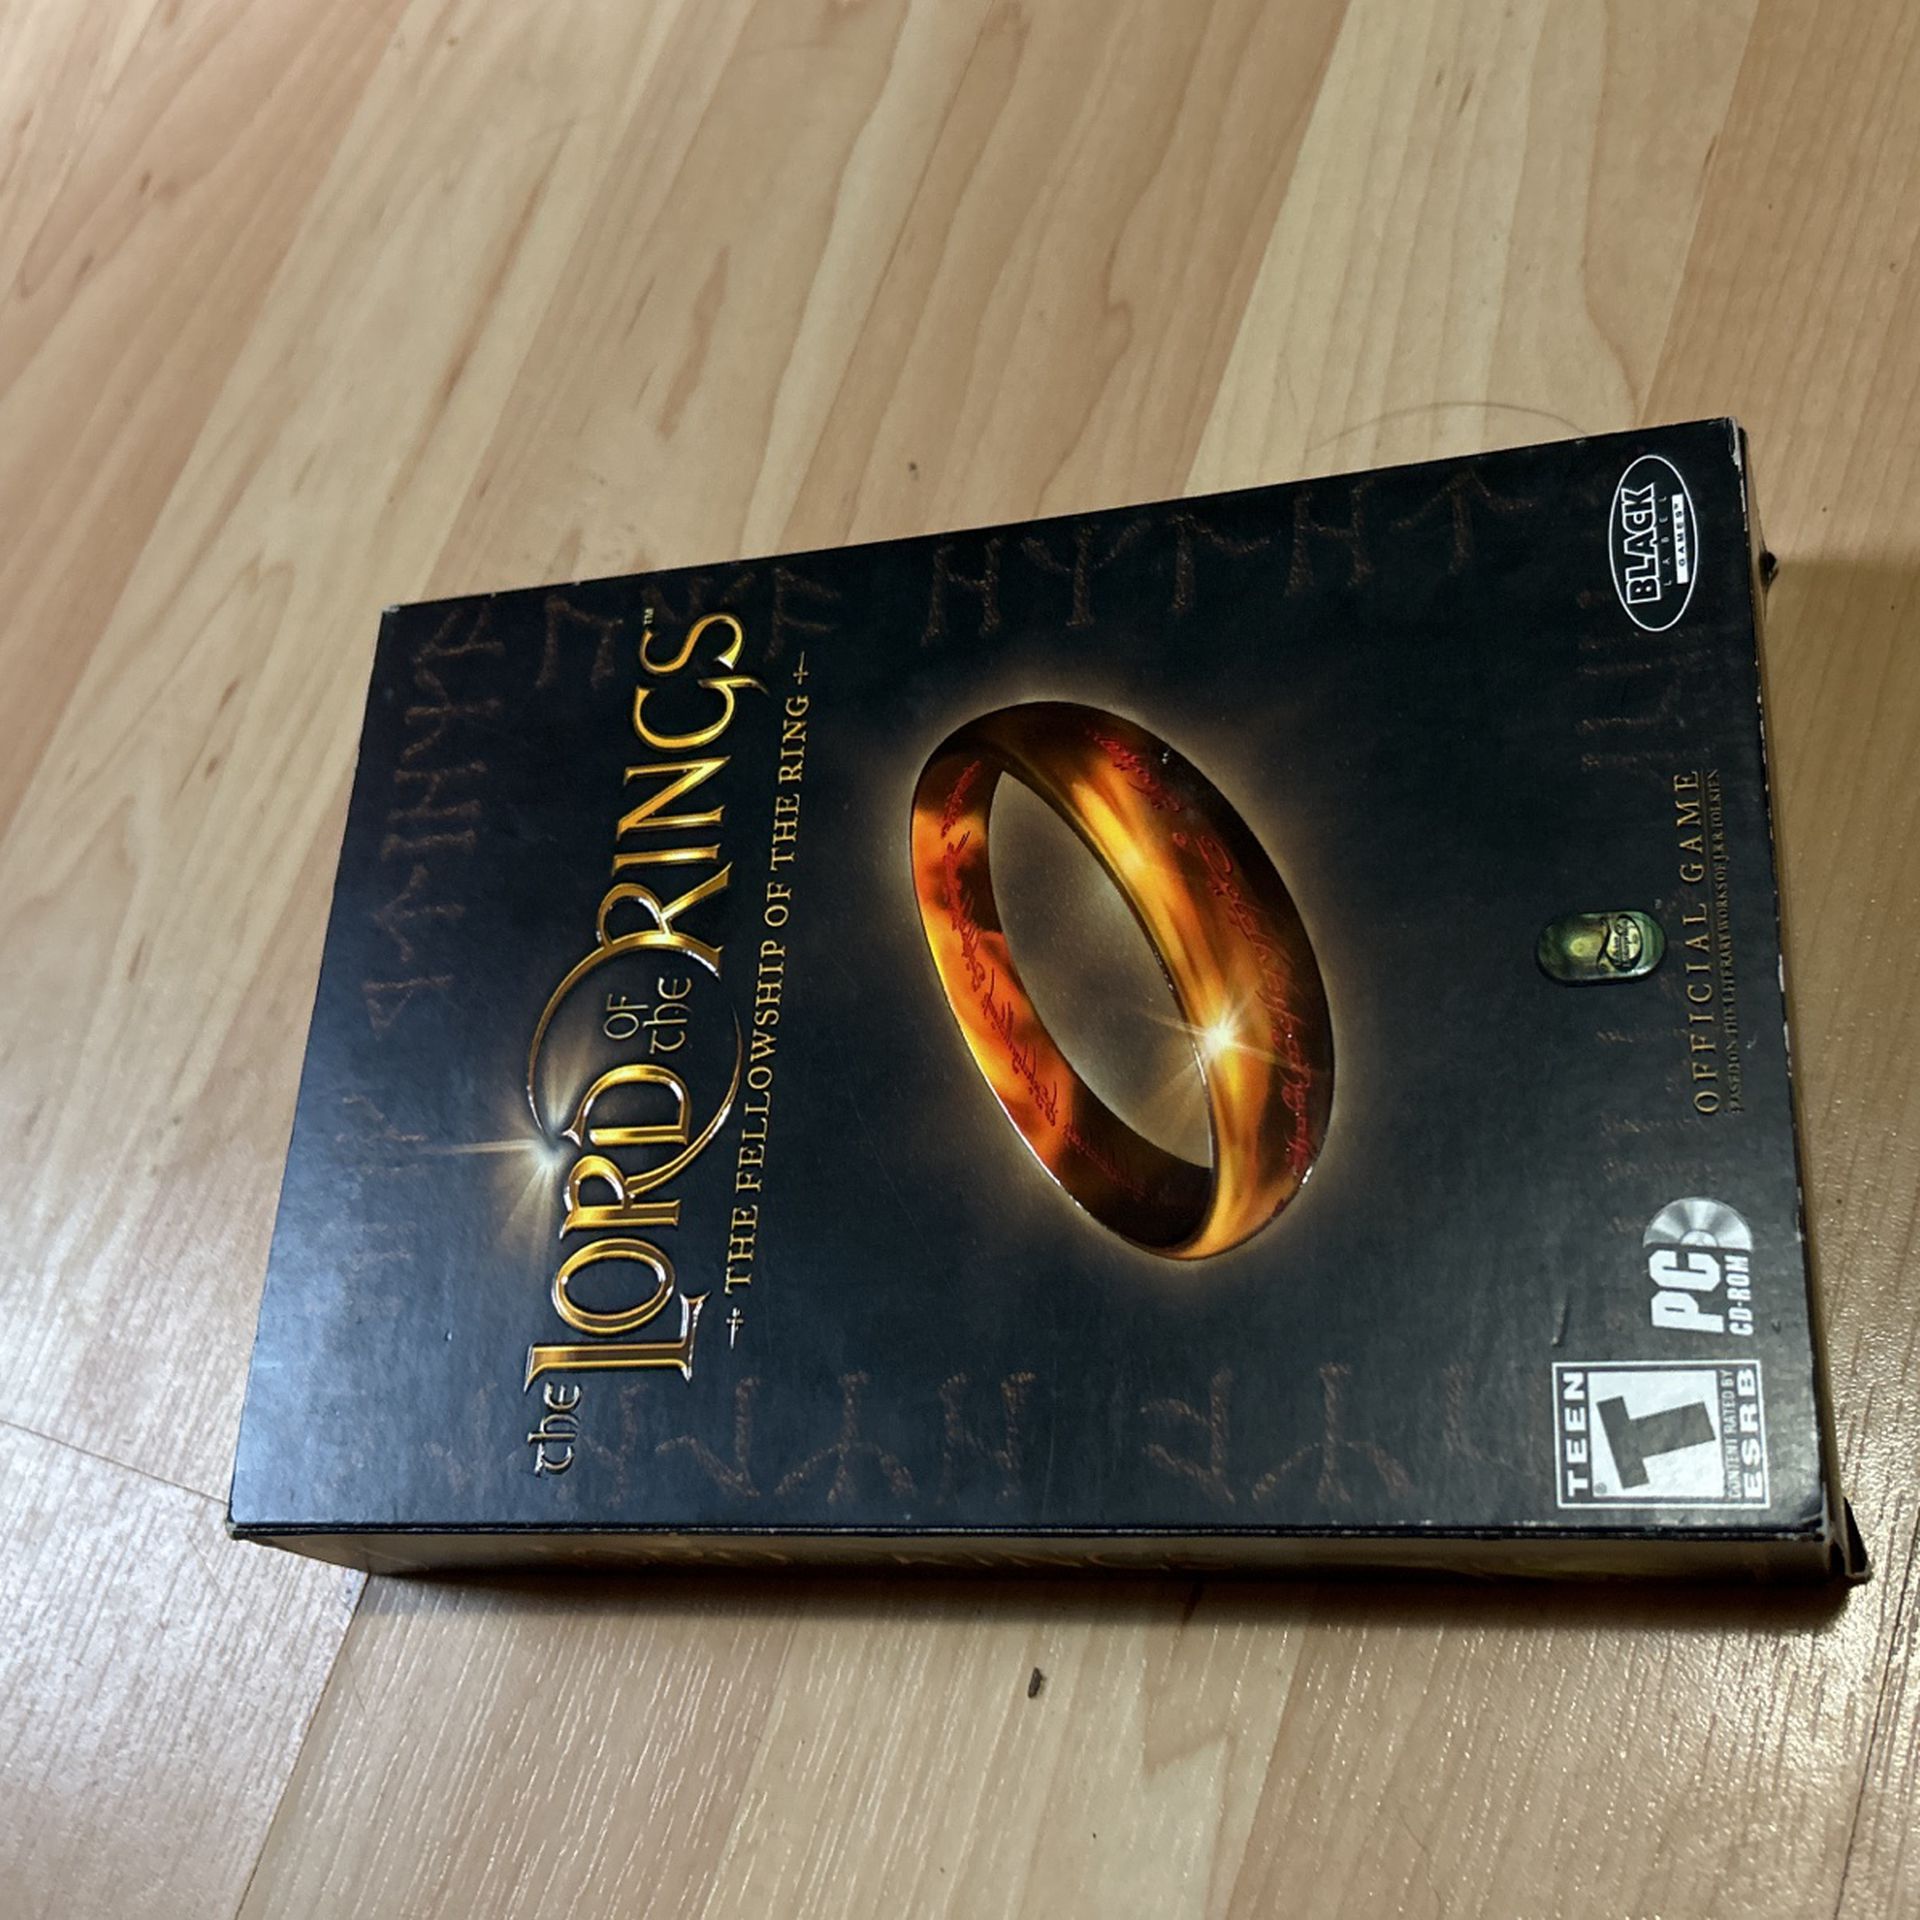 Lord Of The Rings PC Game 2002